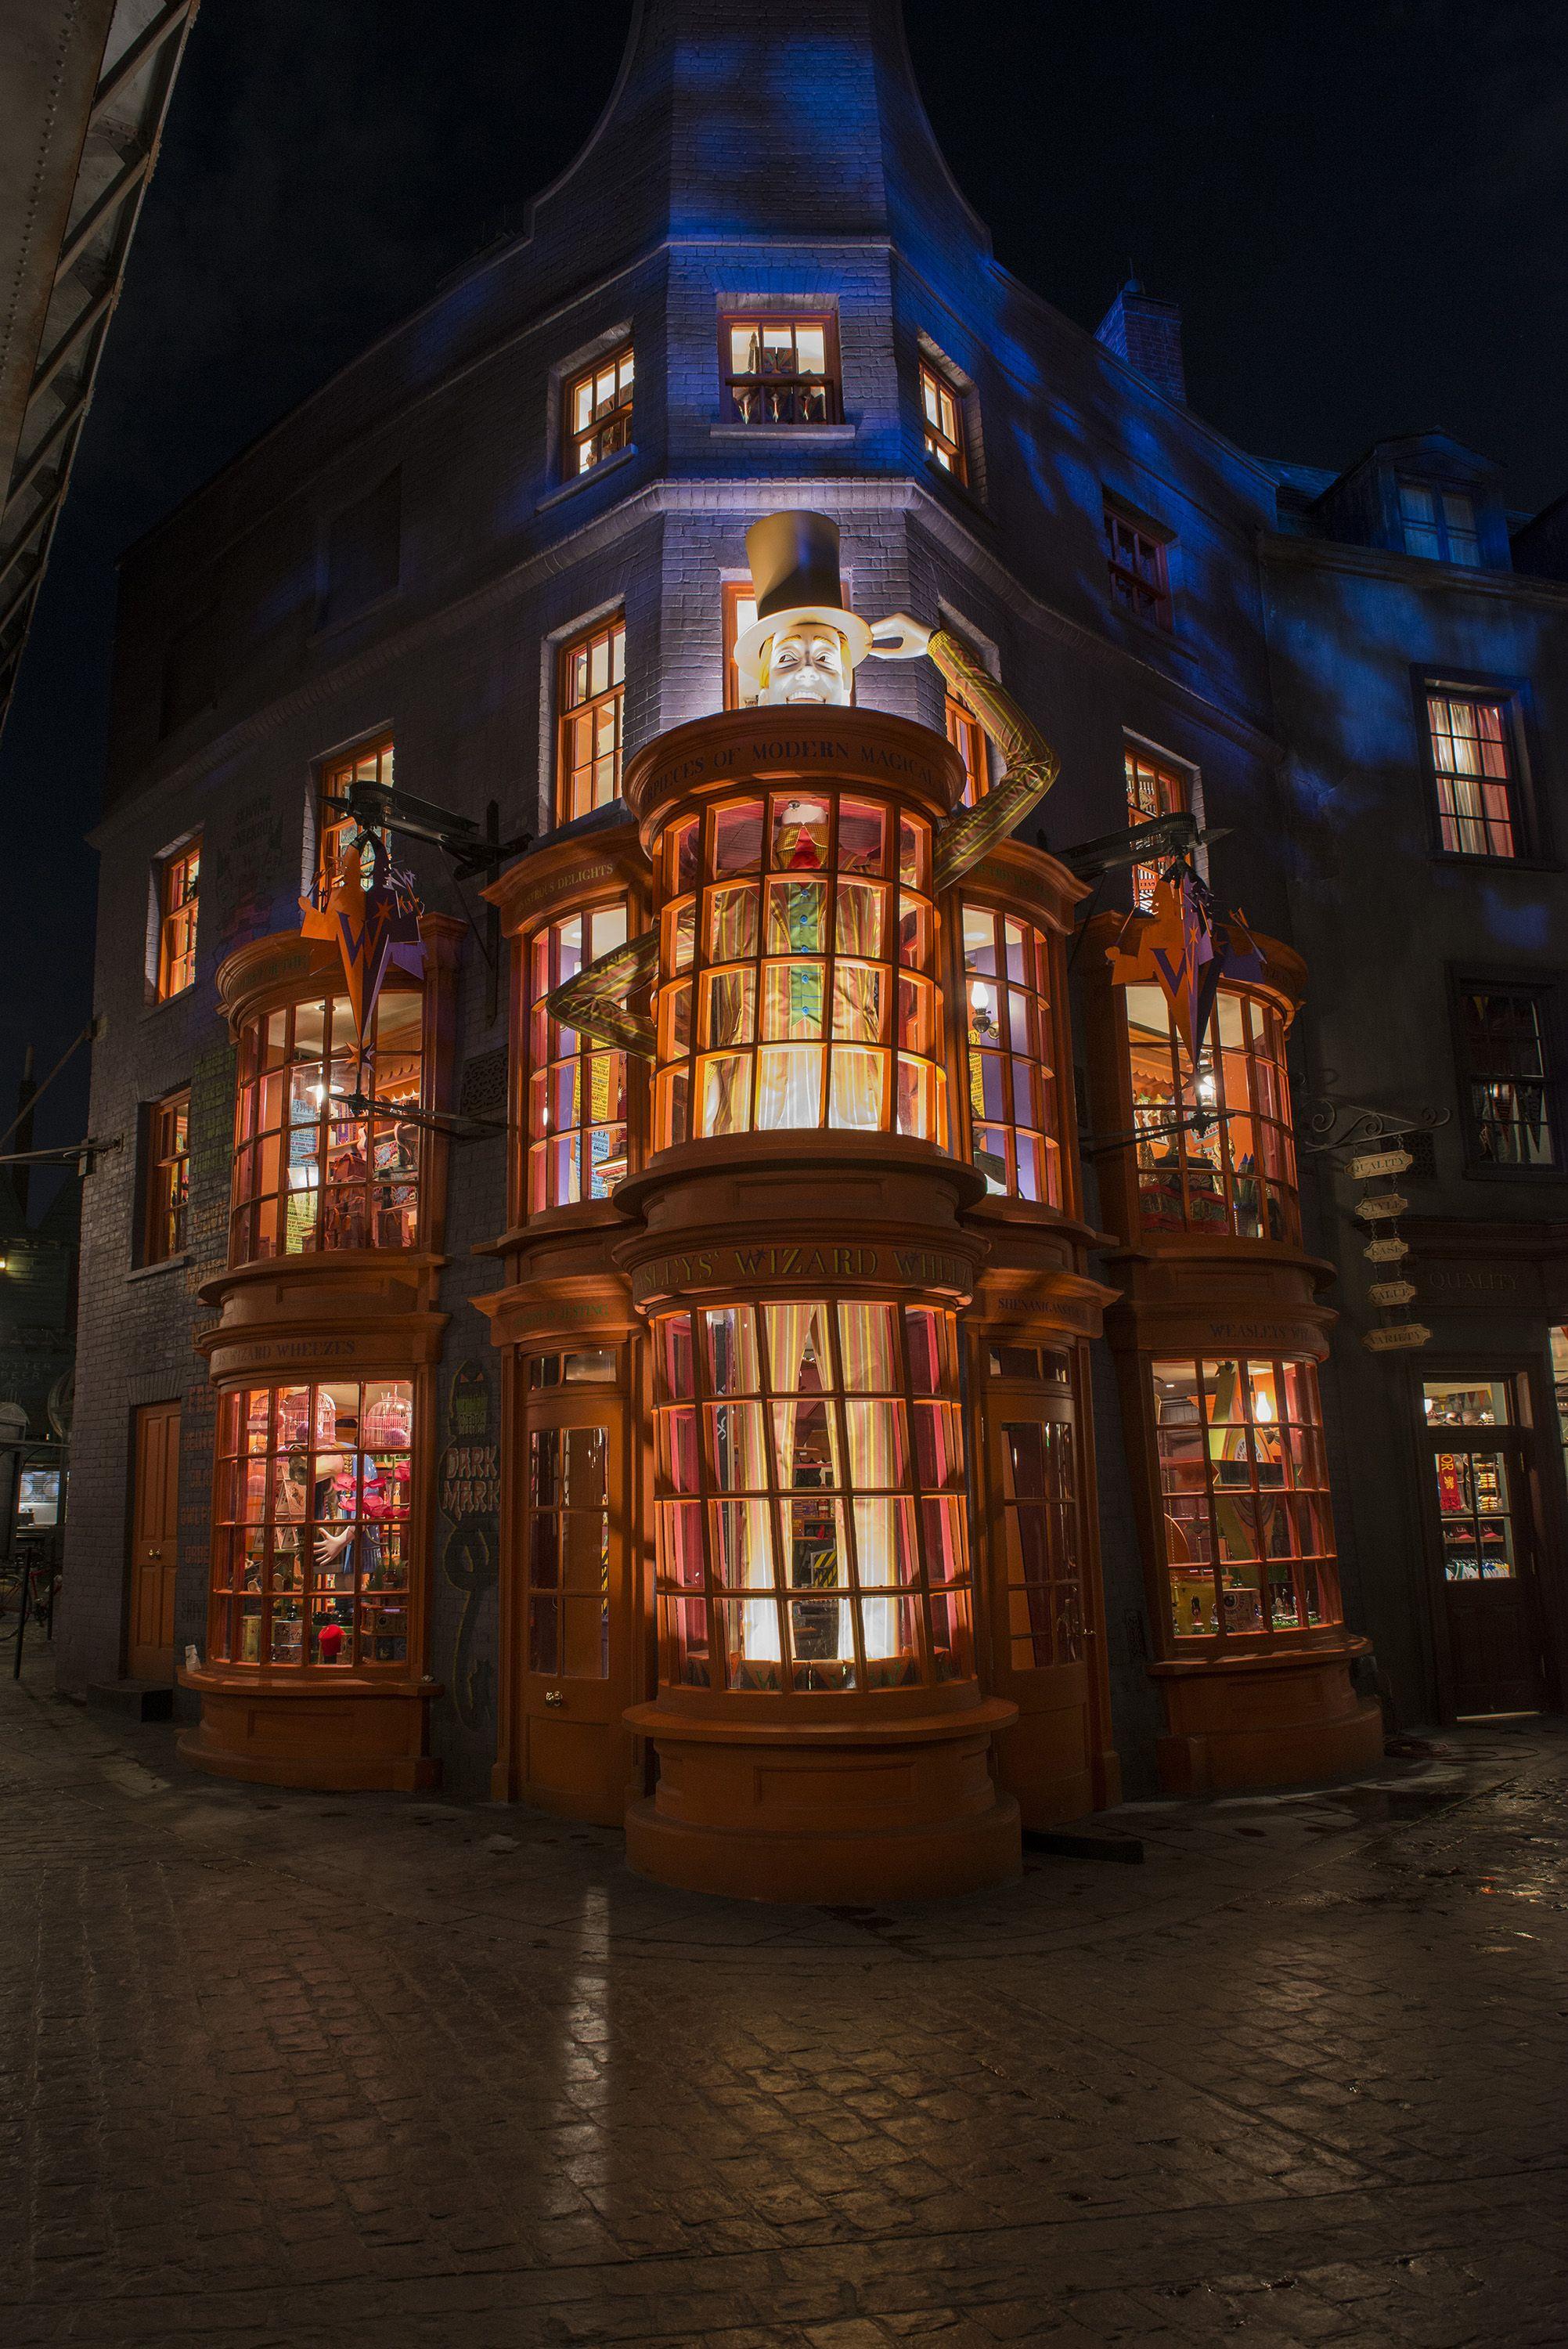 Harry Potter Diagon Alley Image from the New Theme Park Attraction